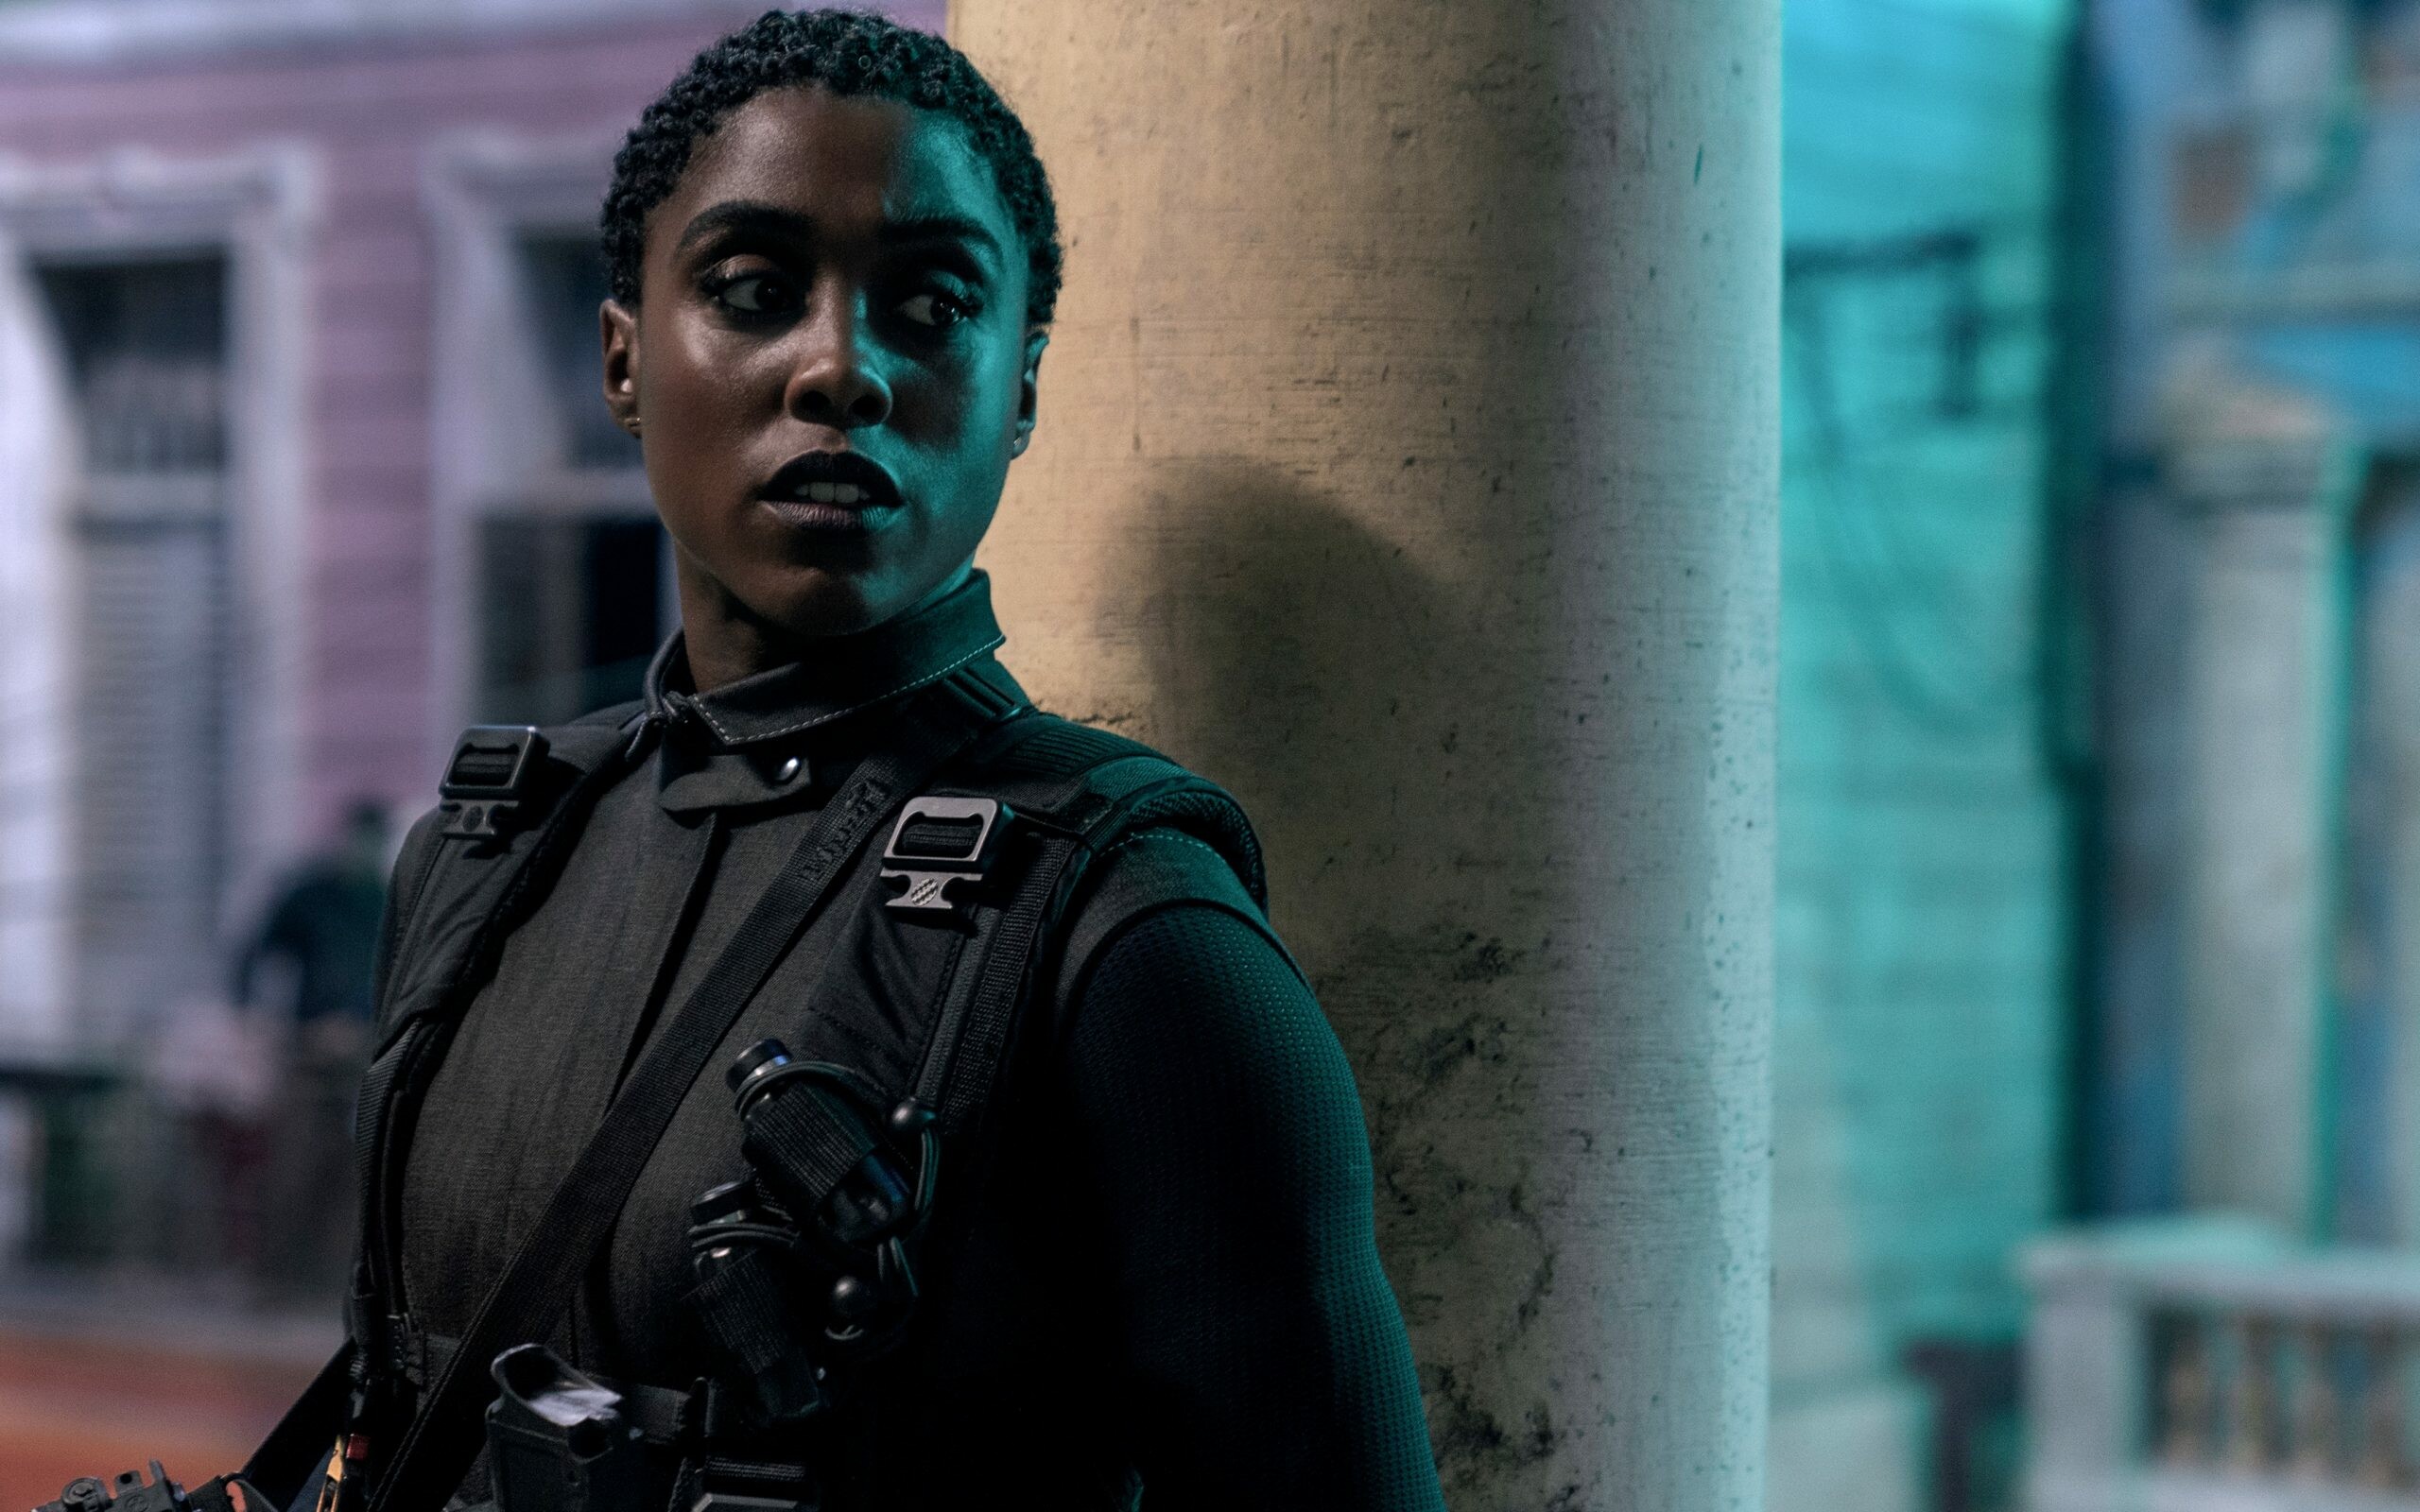 No Time to Die: Lashana Lynch as Nomi, A new "00" agent who entered active service some time after Bond's retirement and was assigned the 007 number. 2560x1600 HD Background.